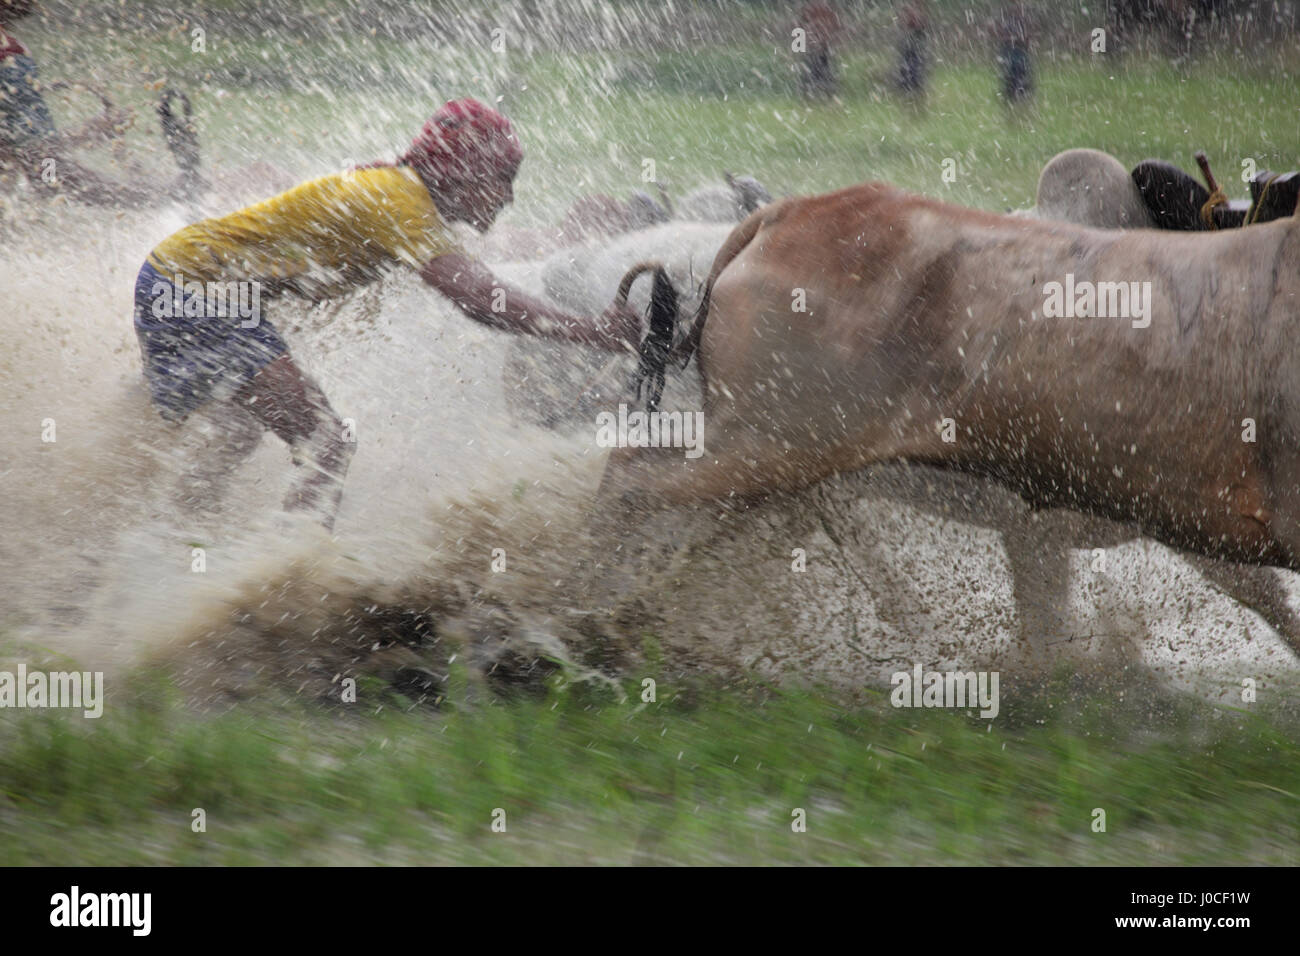 Bull race, Bengale occidental, Inde, Asie Banque D'Images